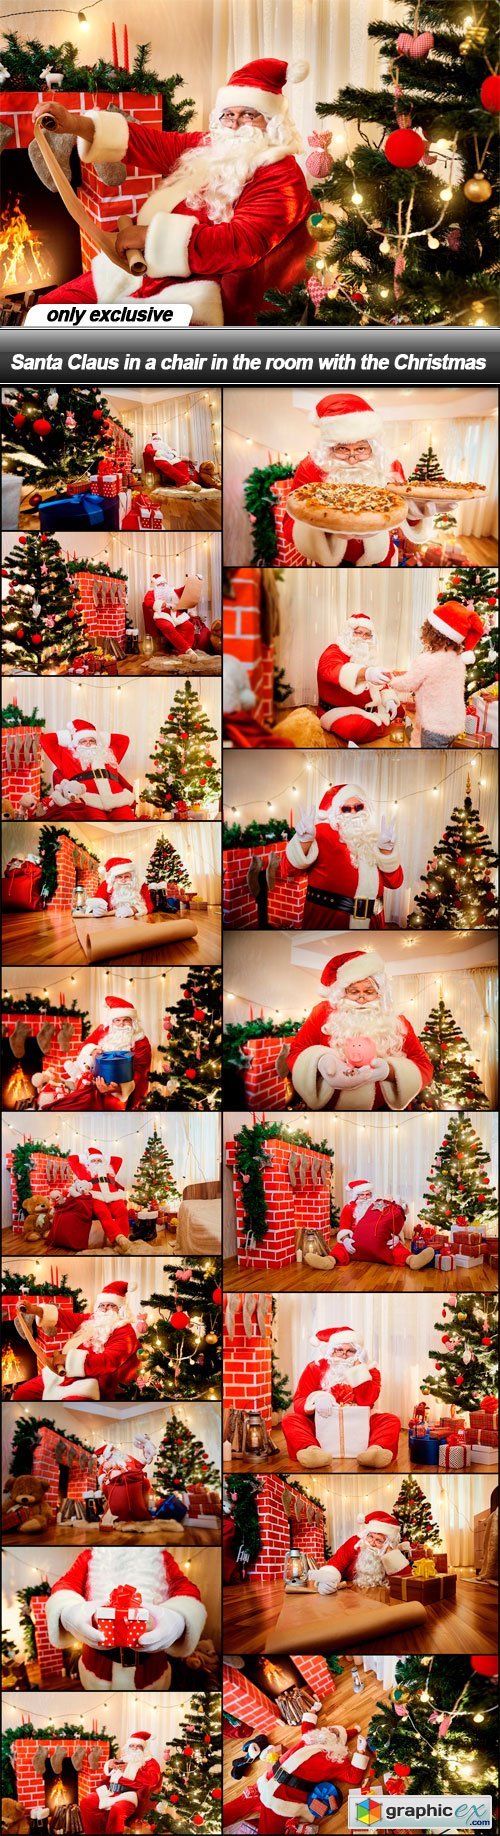 Santa Claus in a chair in the room with the Christmas - 18 UHQ JPEG